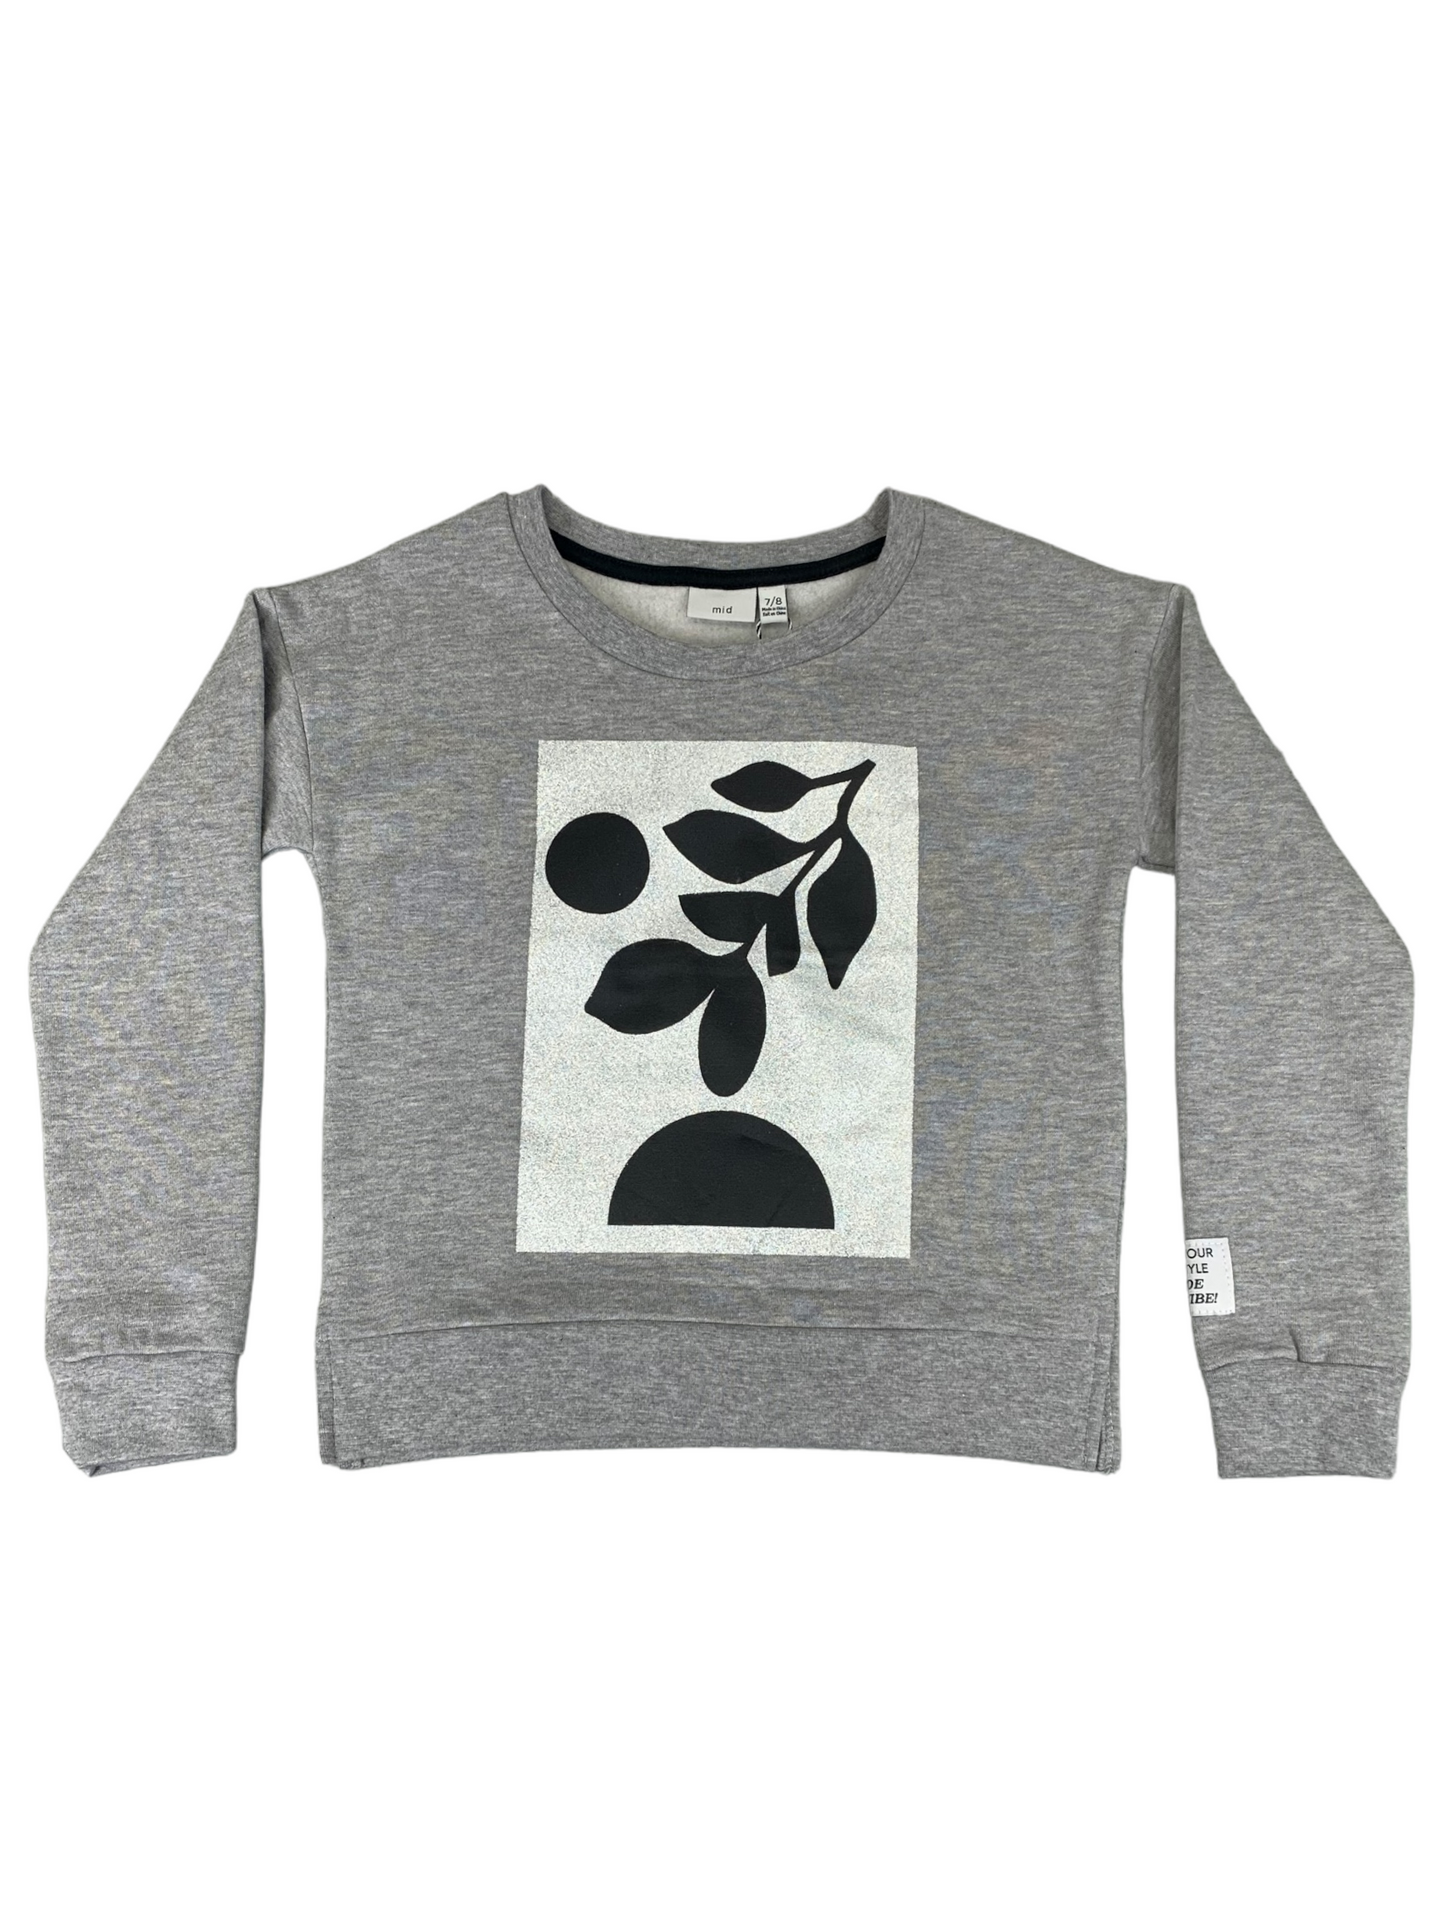 Gray crewneck MID for girls 7 to 14 years